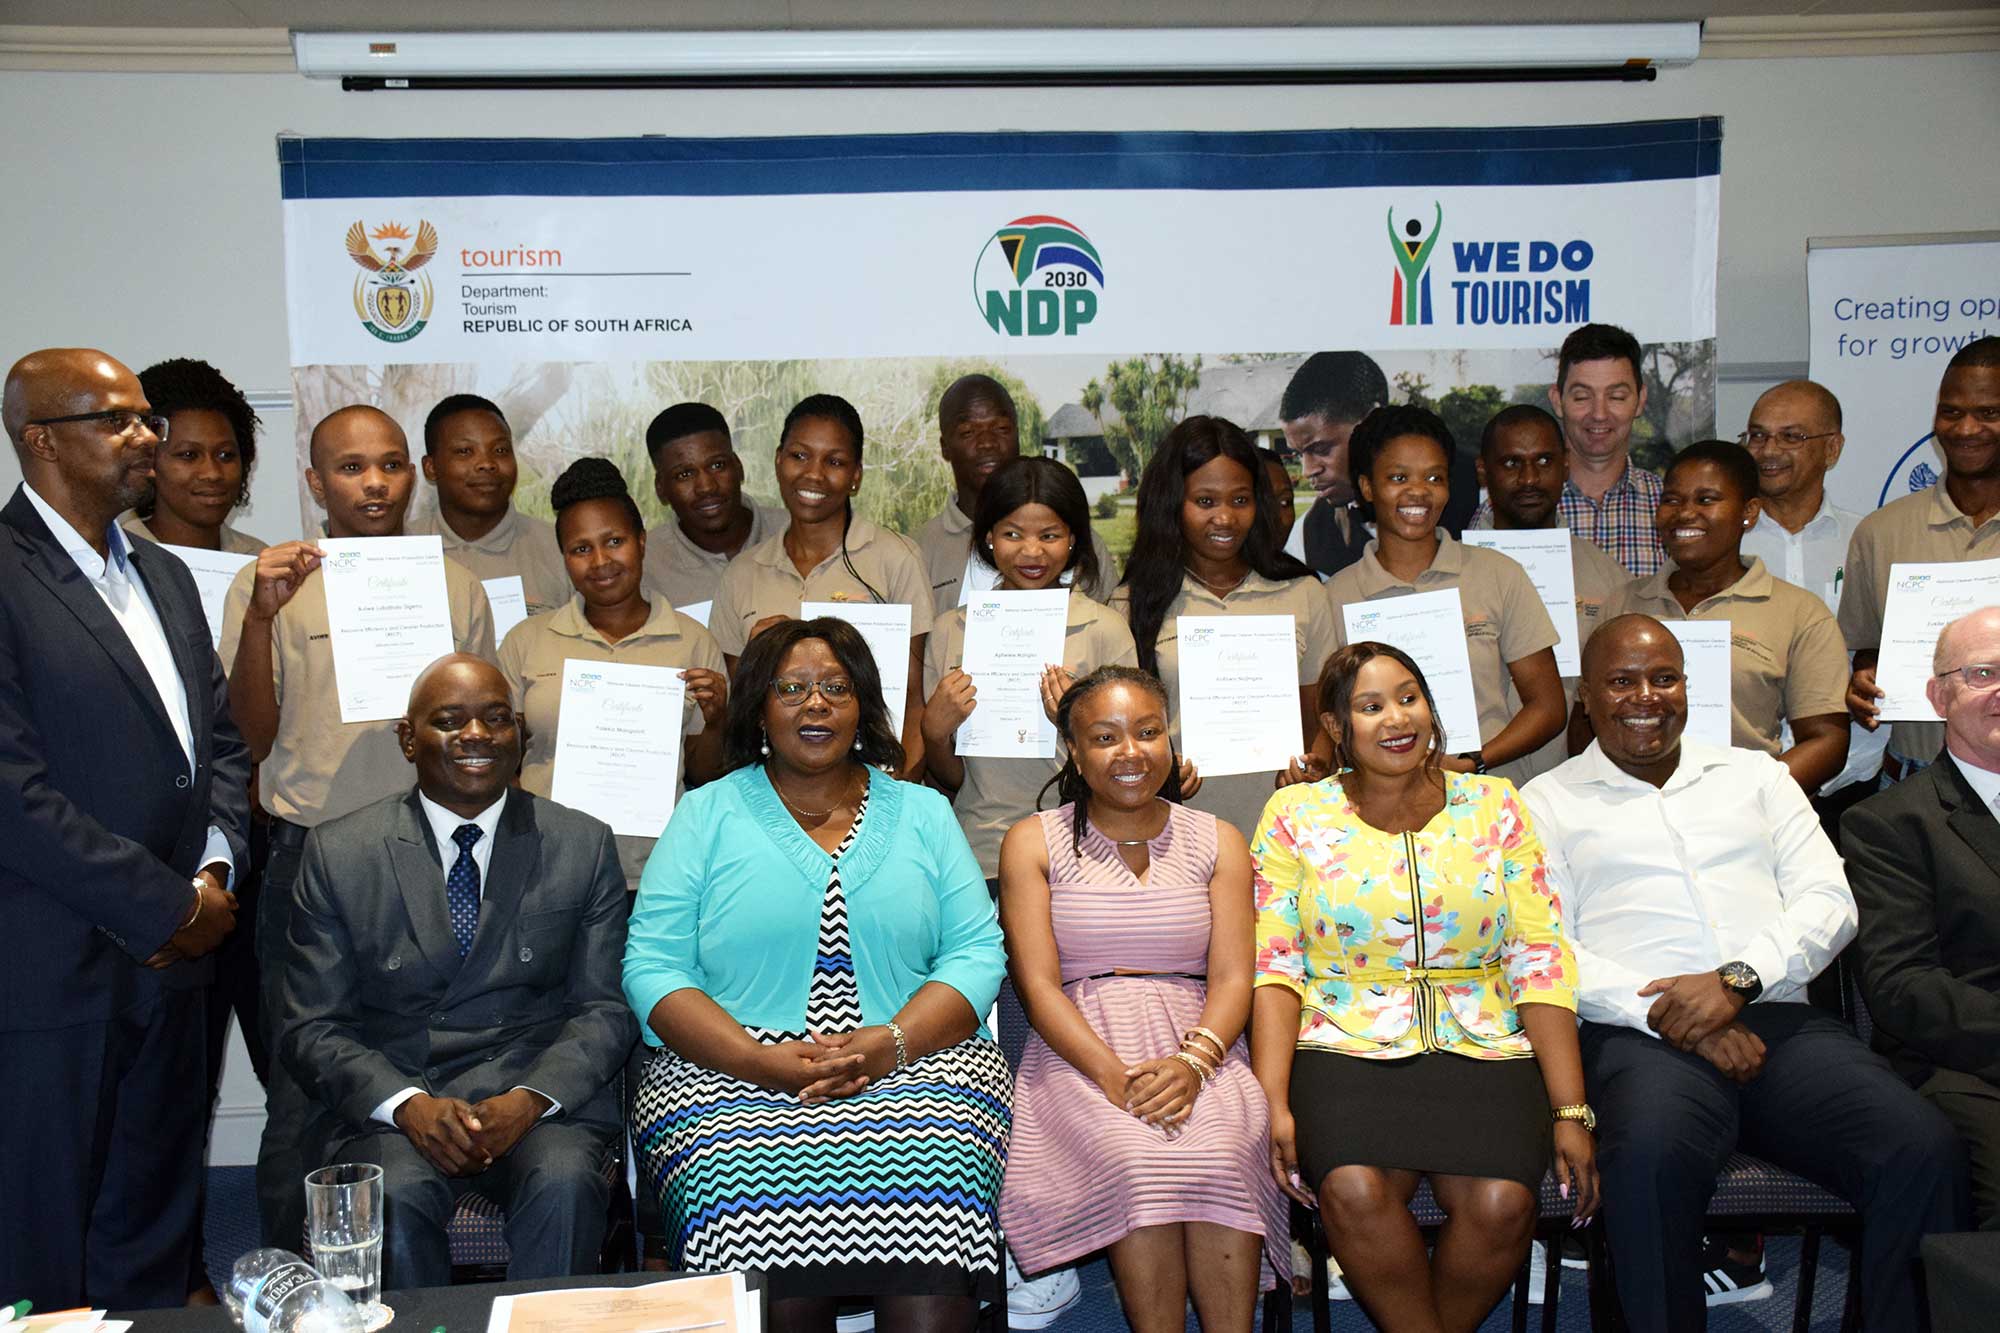 Learners received credentials in the field of responsible tourism practices